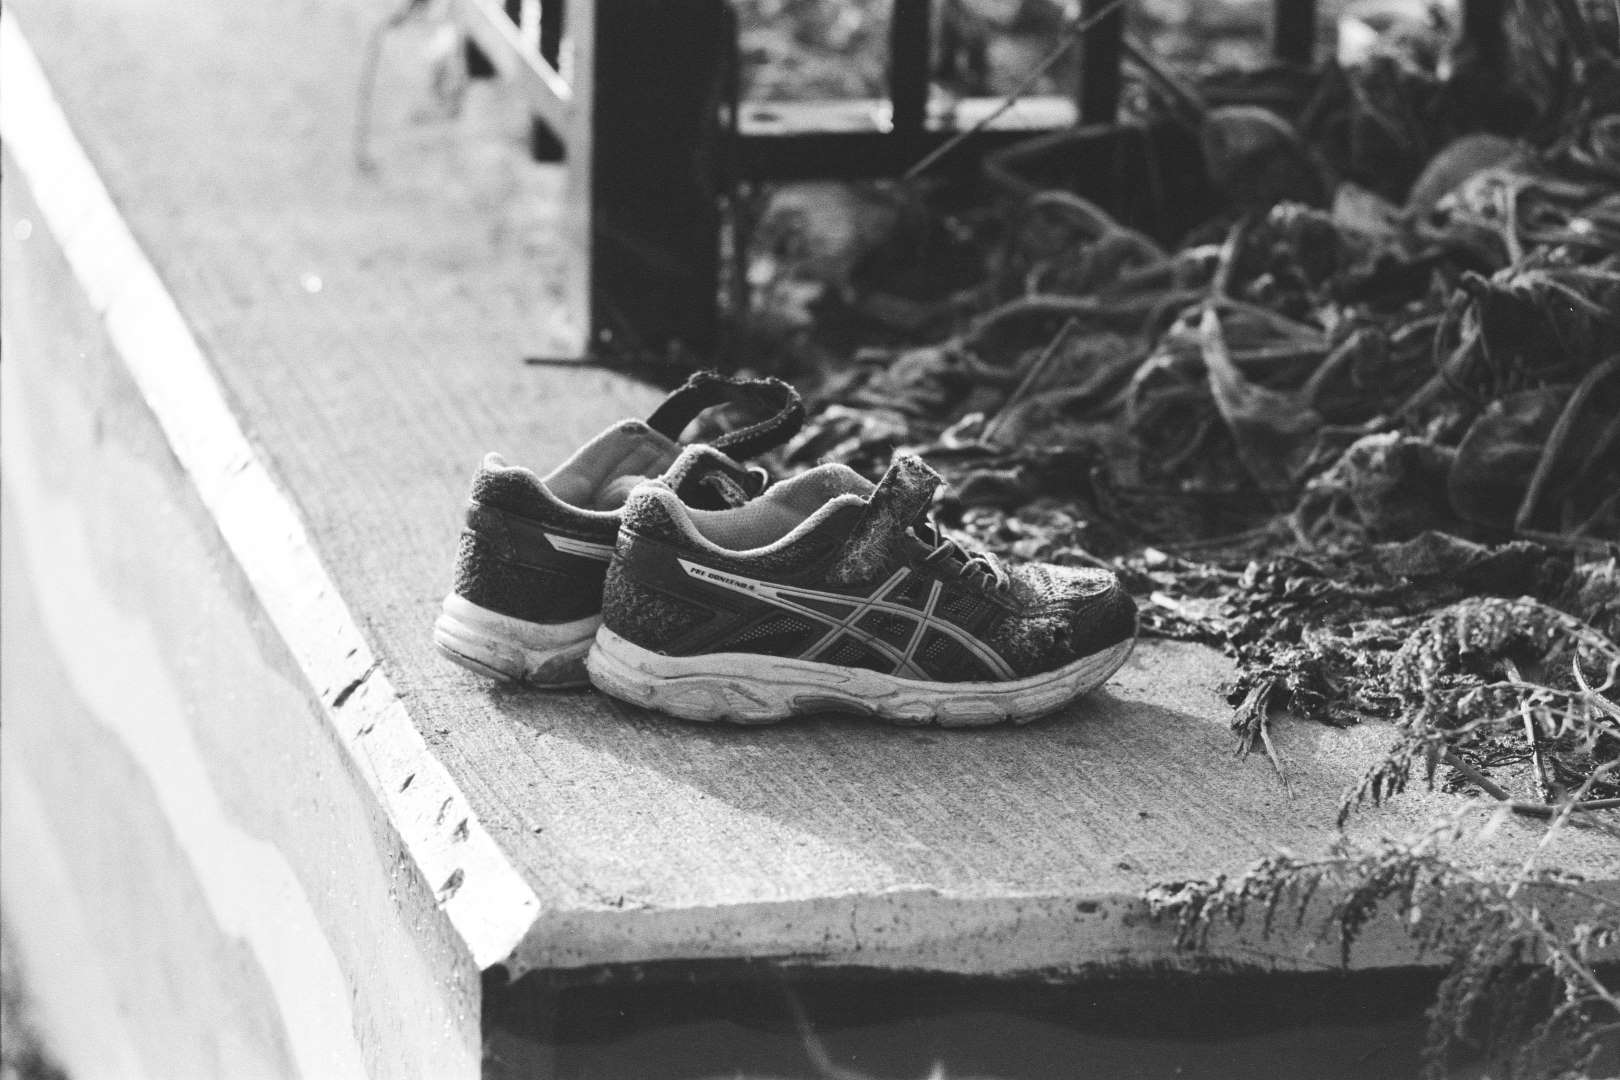 A black and white photograph of worn out running shoes left on a small wall